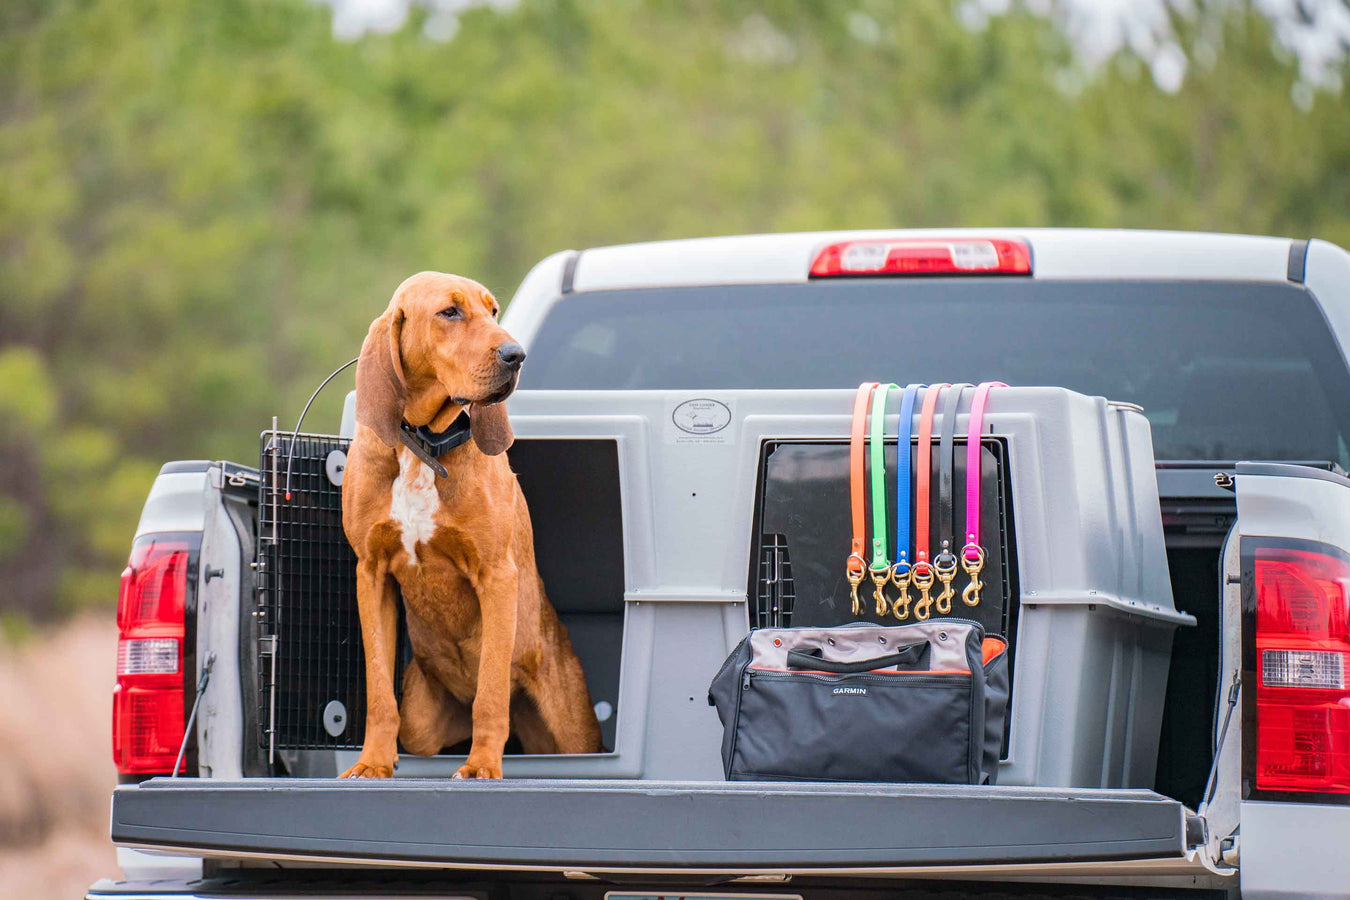 Hound dog in the back of truck with kennel and assorted dog collars